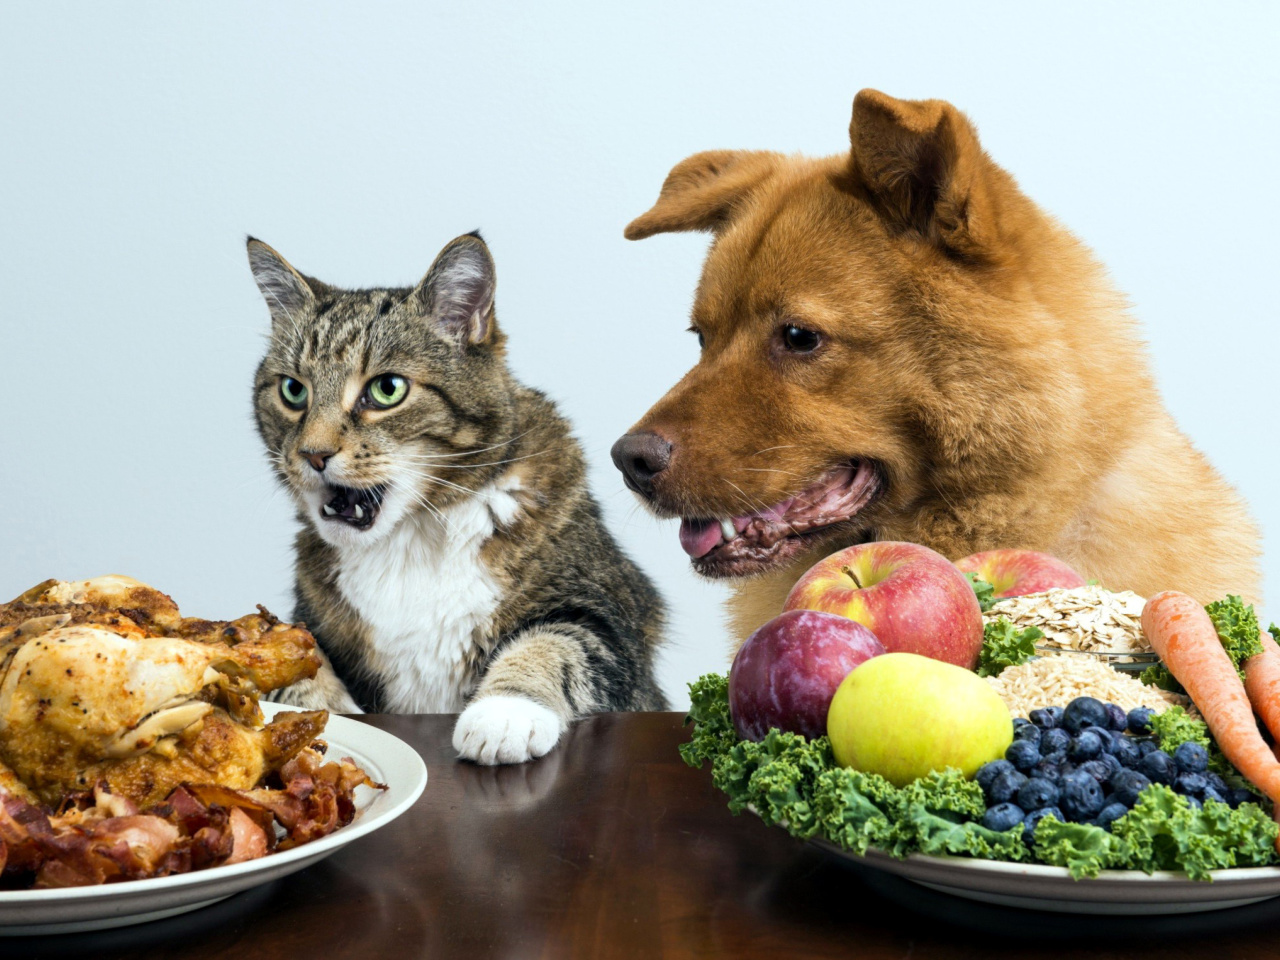 Dog and Cat Dinner wallpaper 1280x960